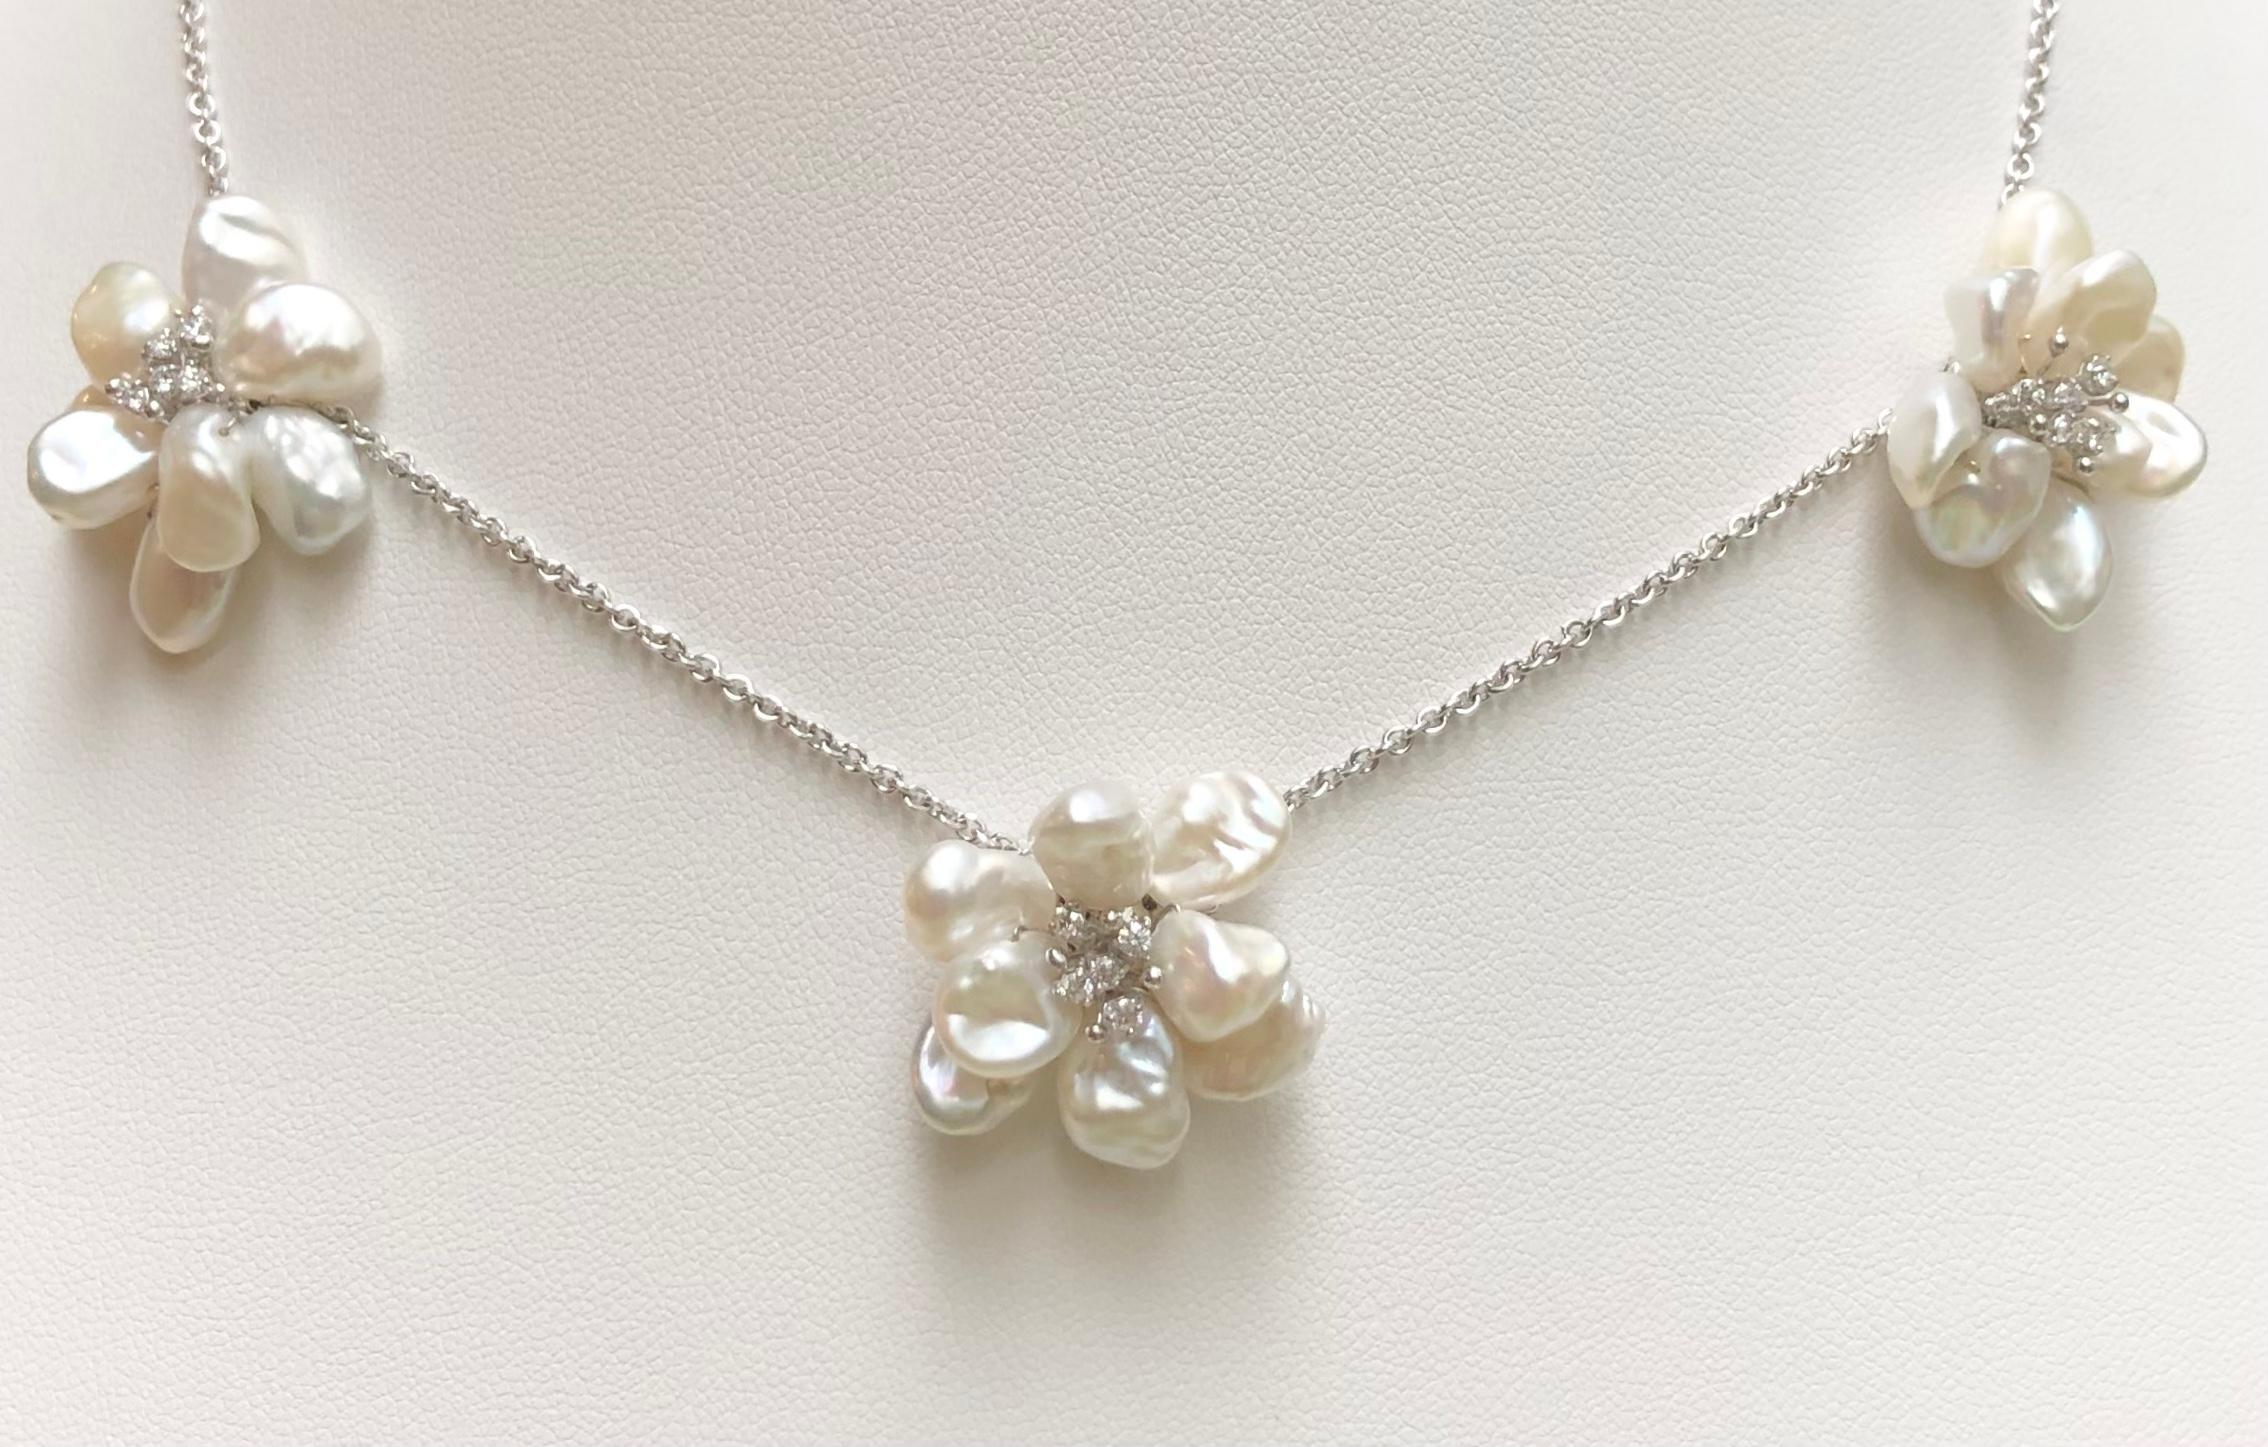 Pearl with Diamond 0.35 carat Necklace set in 18 Karat White Gold Settings

Width:  2.6 cm 
Length:  41.0 cm
Total Weight: 21.92 grams

